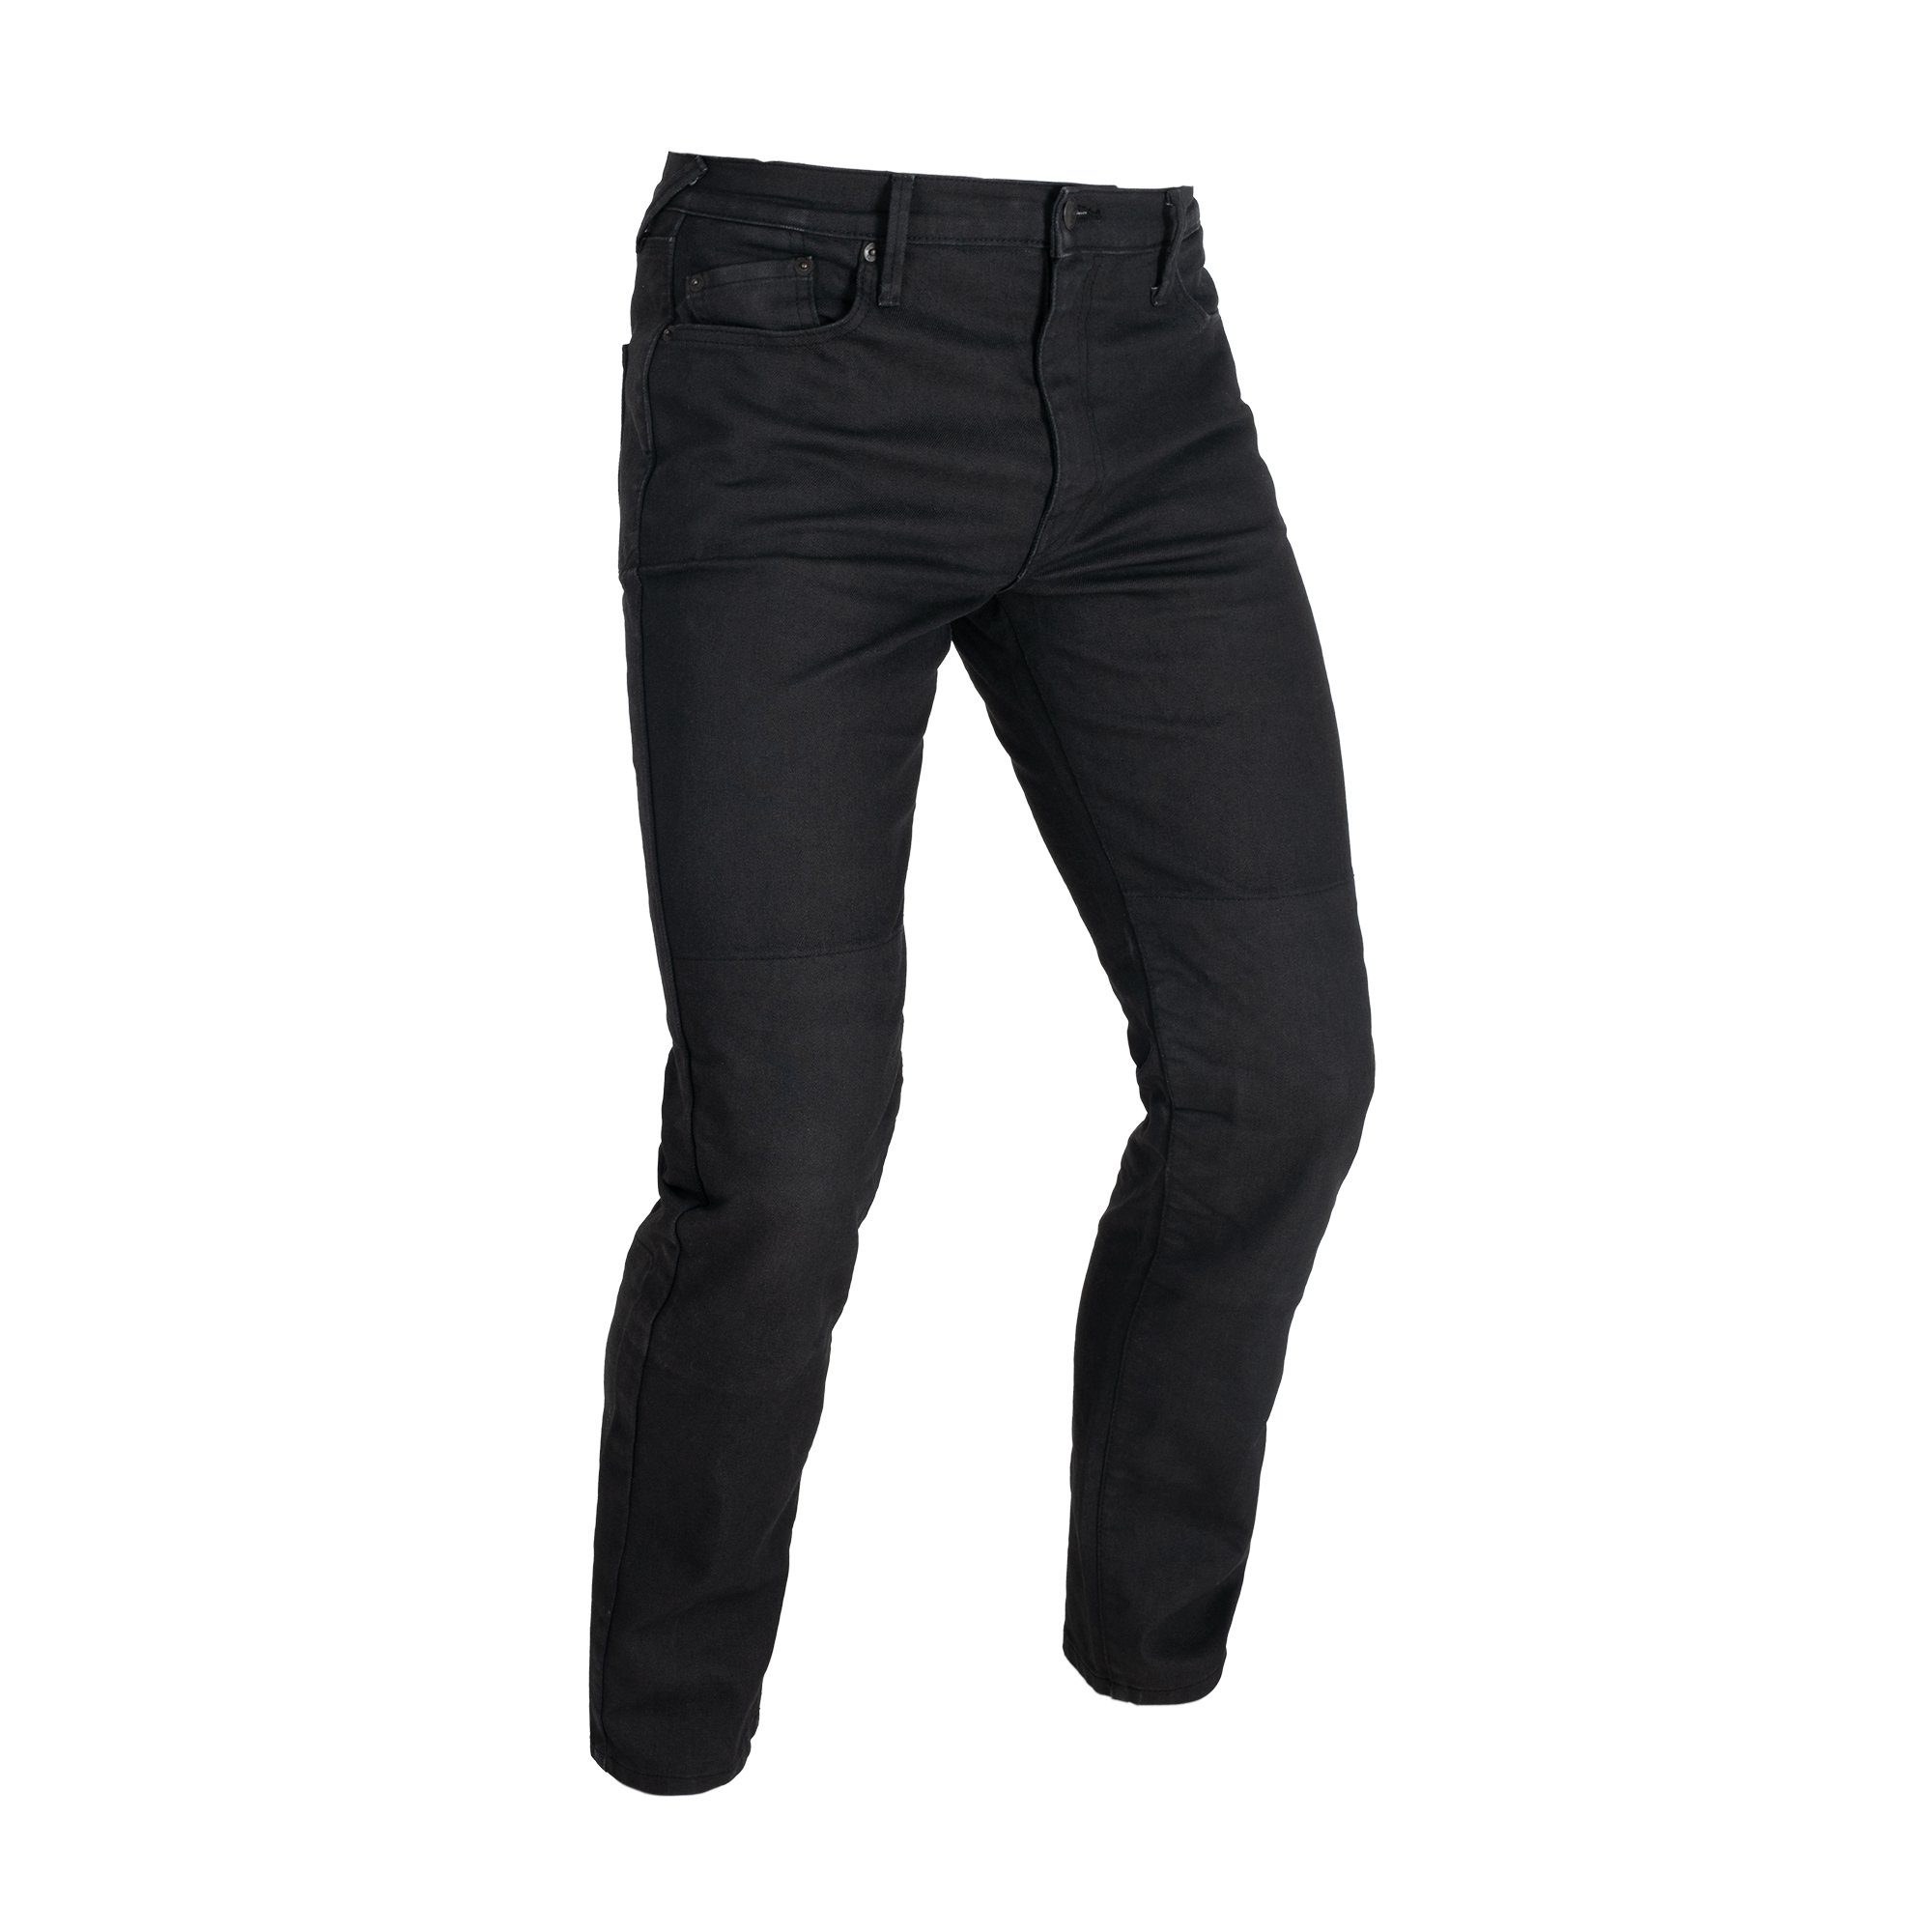 OA AAA Slim MS Jeans Blk 44 : Oxford Products